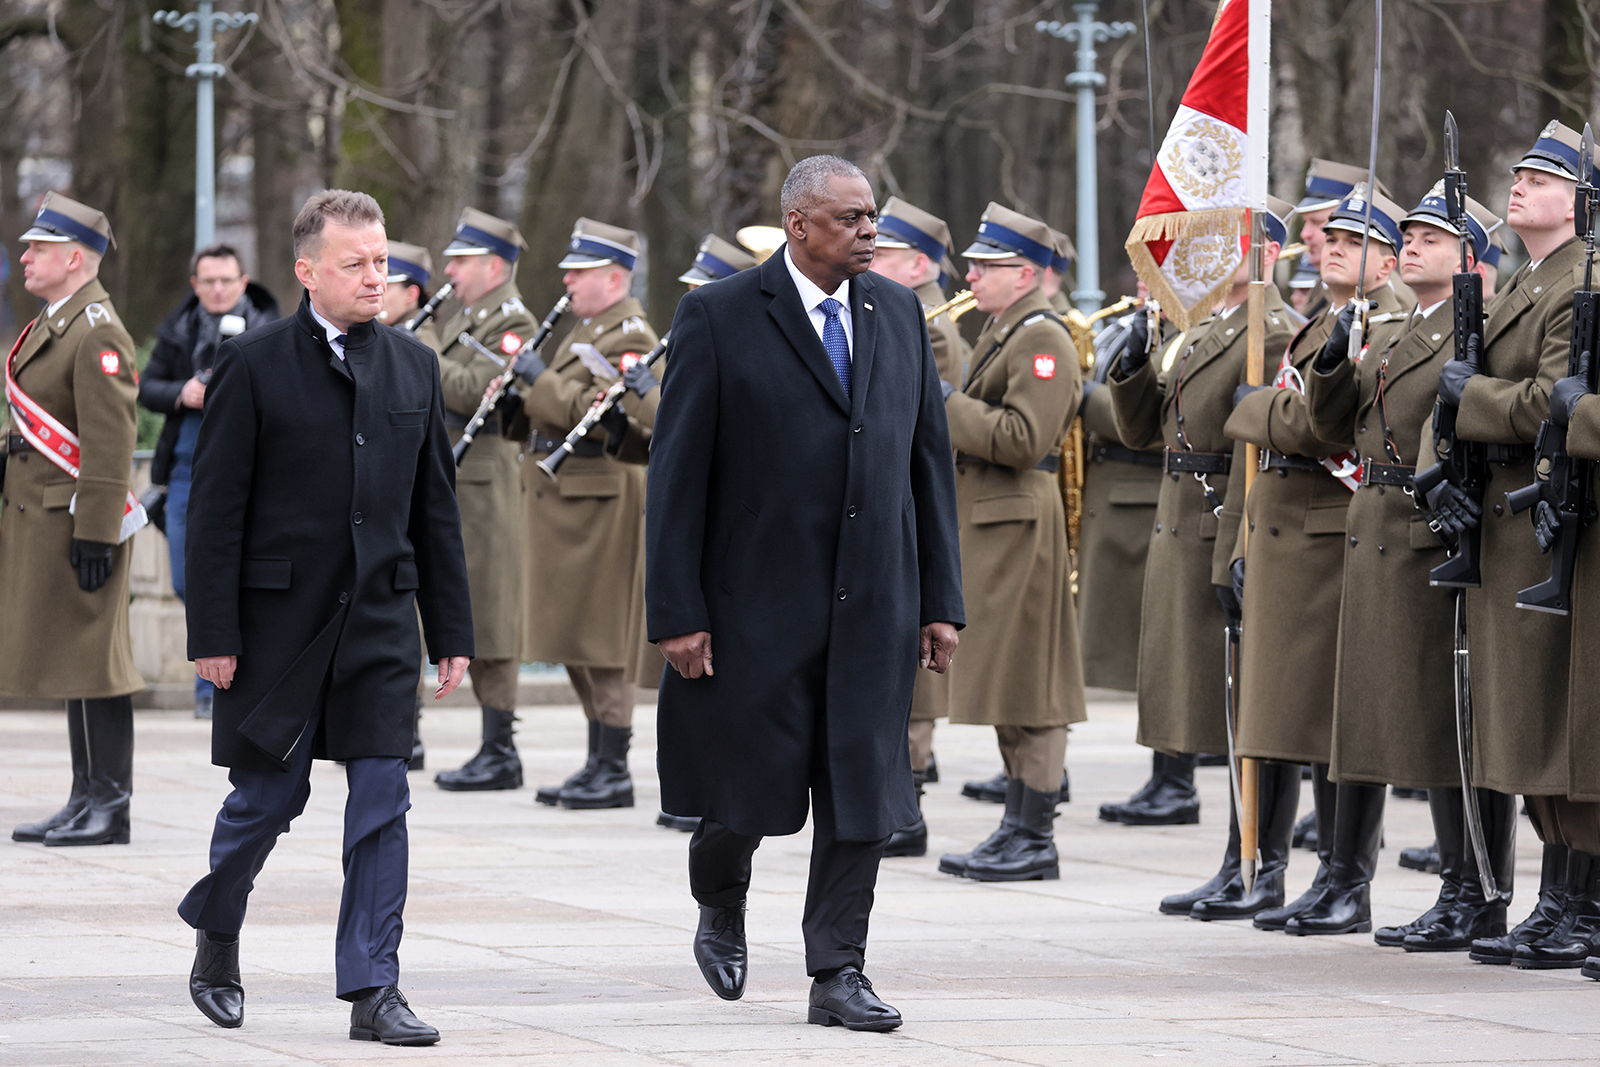 US Defense Secretary Lloyd Austin, right, inspects the honor guard with his Polish counterpart Mariusz Blaszczak during a welcoming ceremony in Warsaw, Poland, on February 18. 